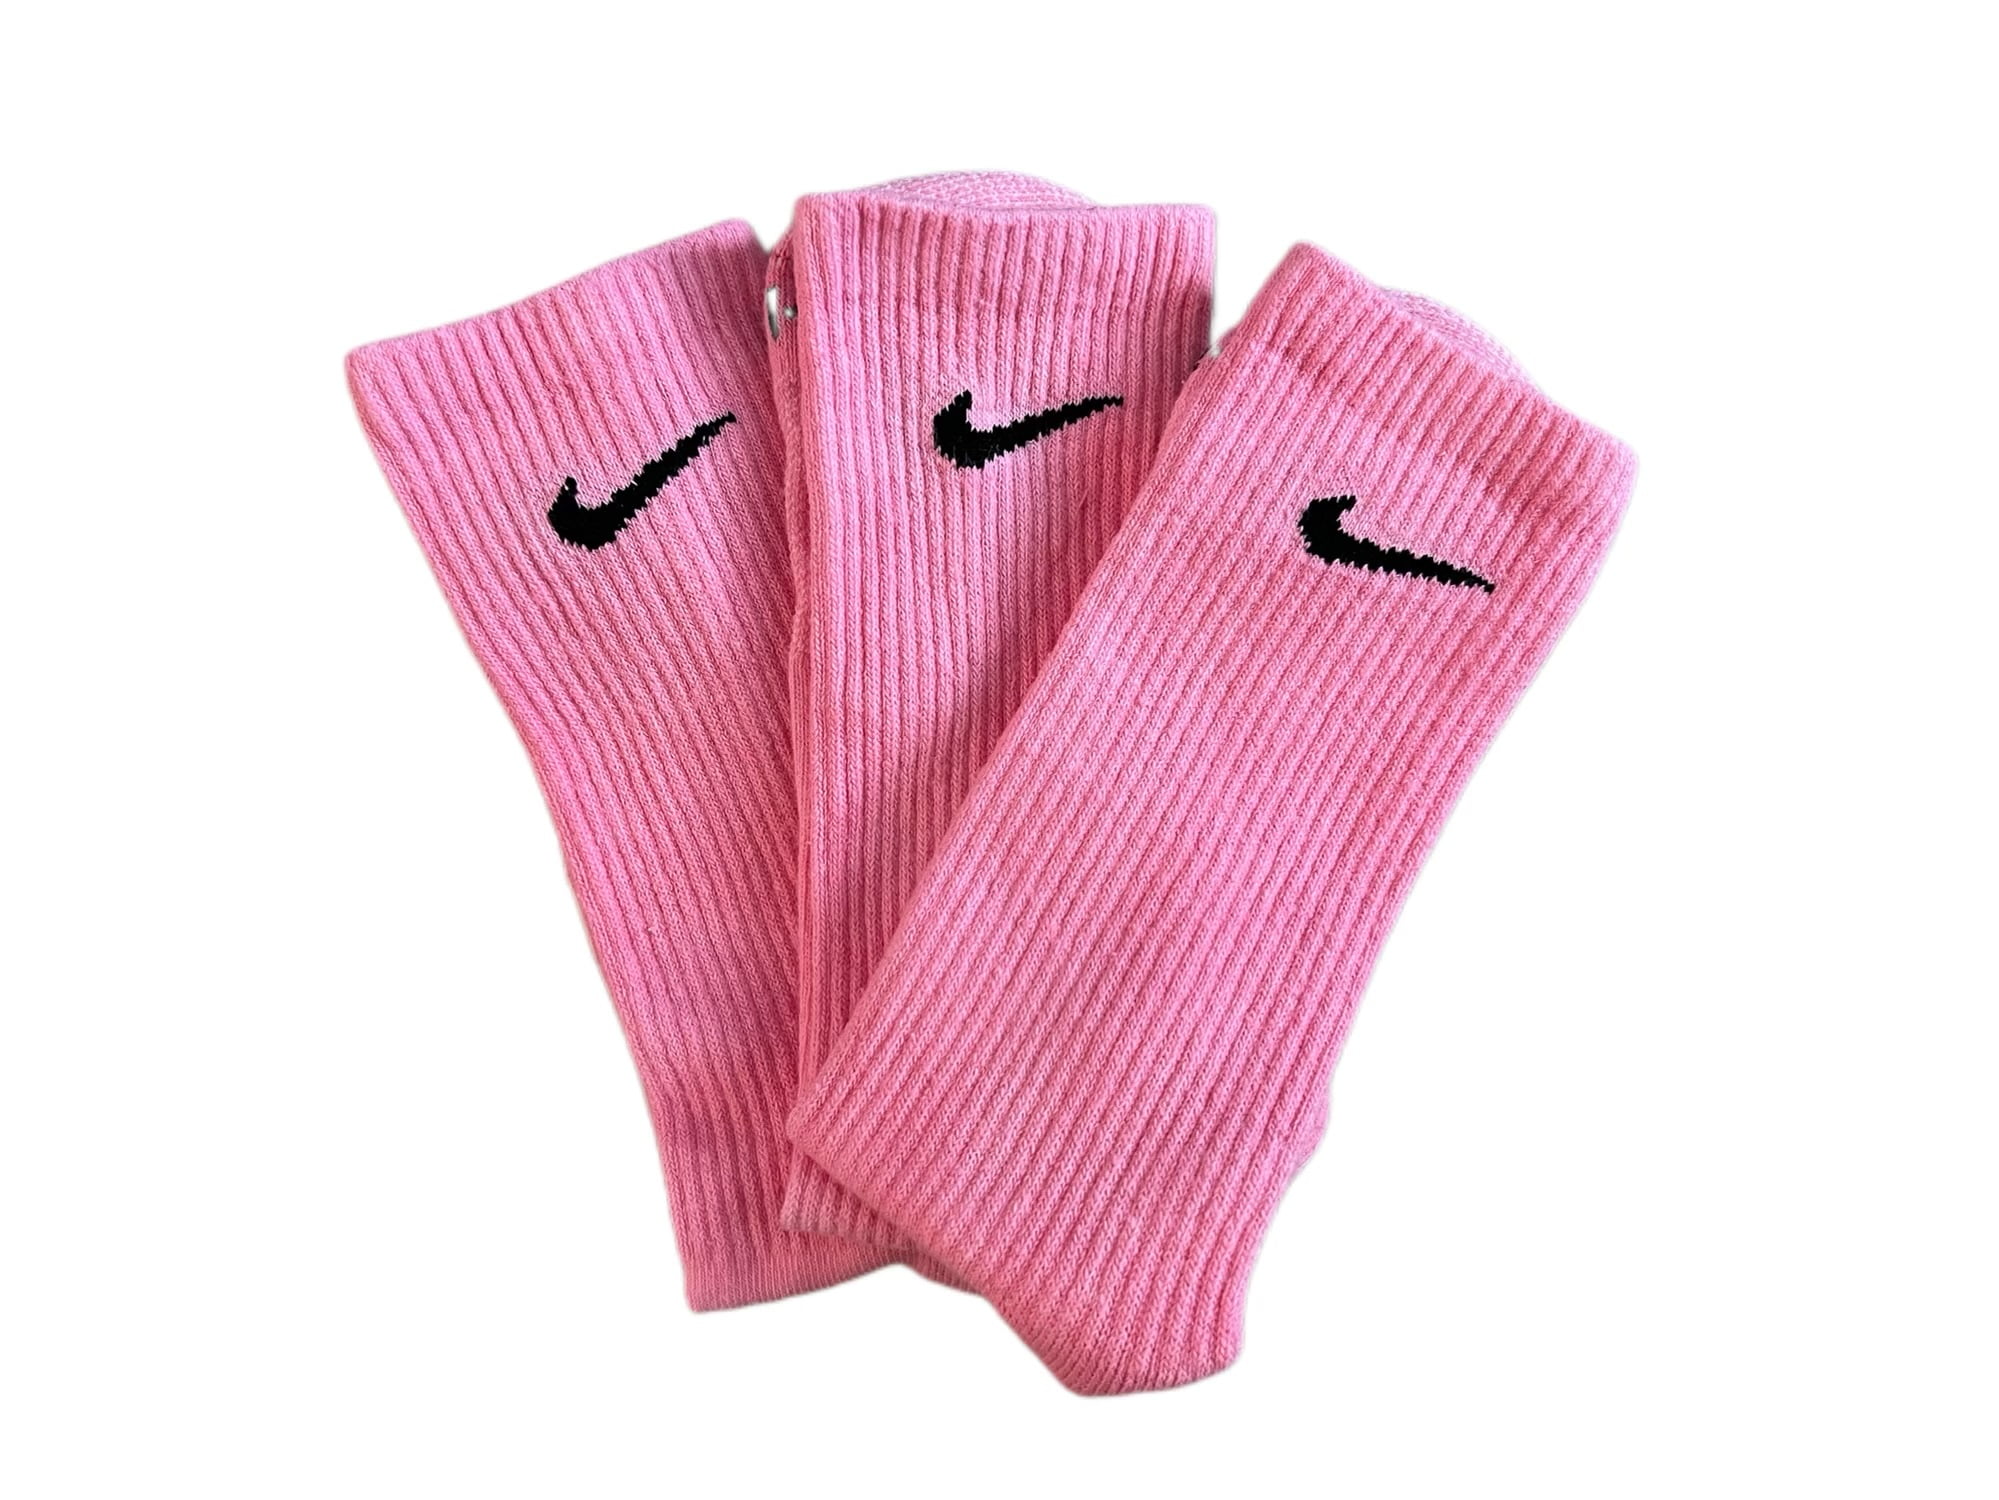 Dri Fit, Pack 3 Socks - Large, Pink Punch Pack Unisex Adult Crew Nike